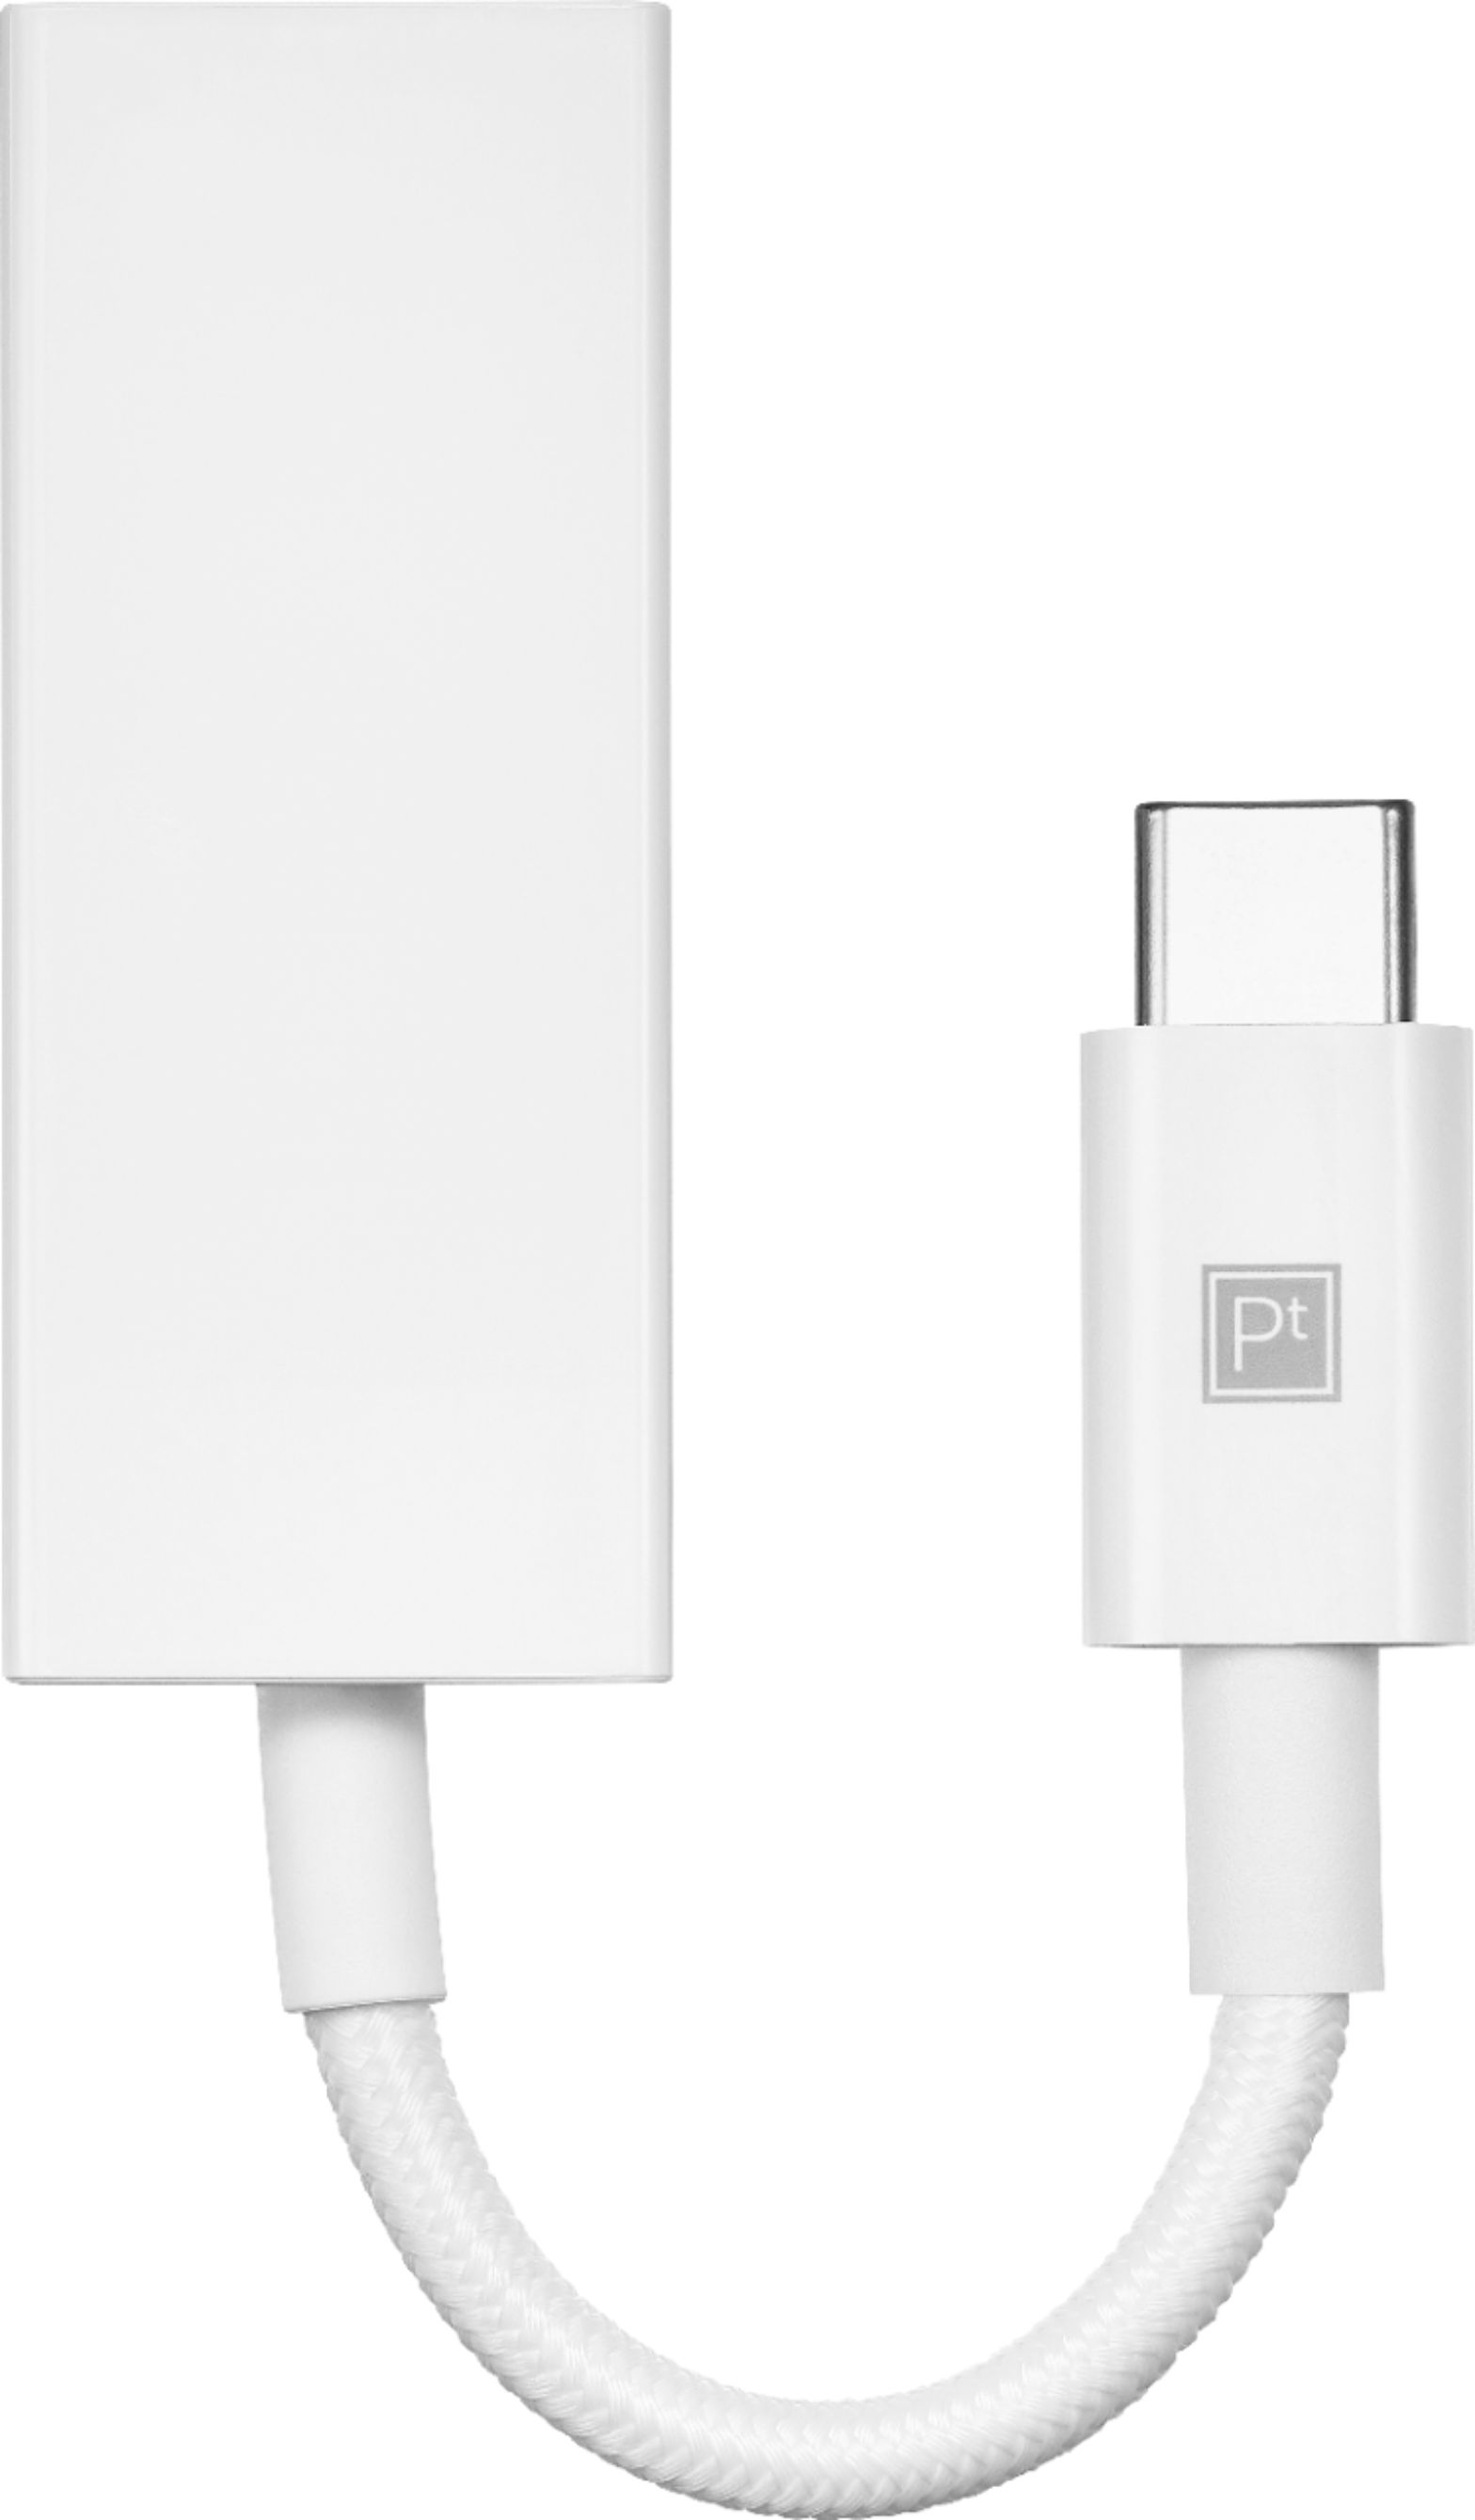 ethernet cable adapter for mac